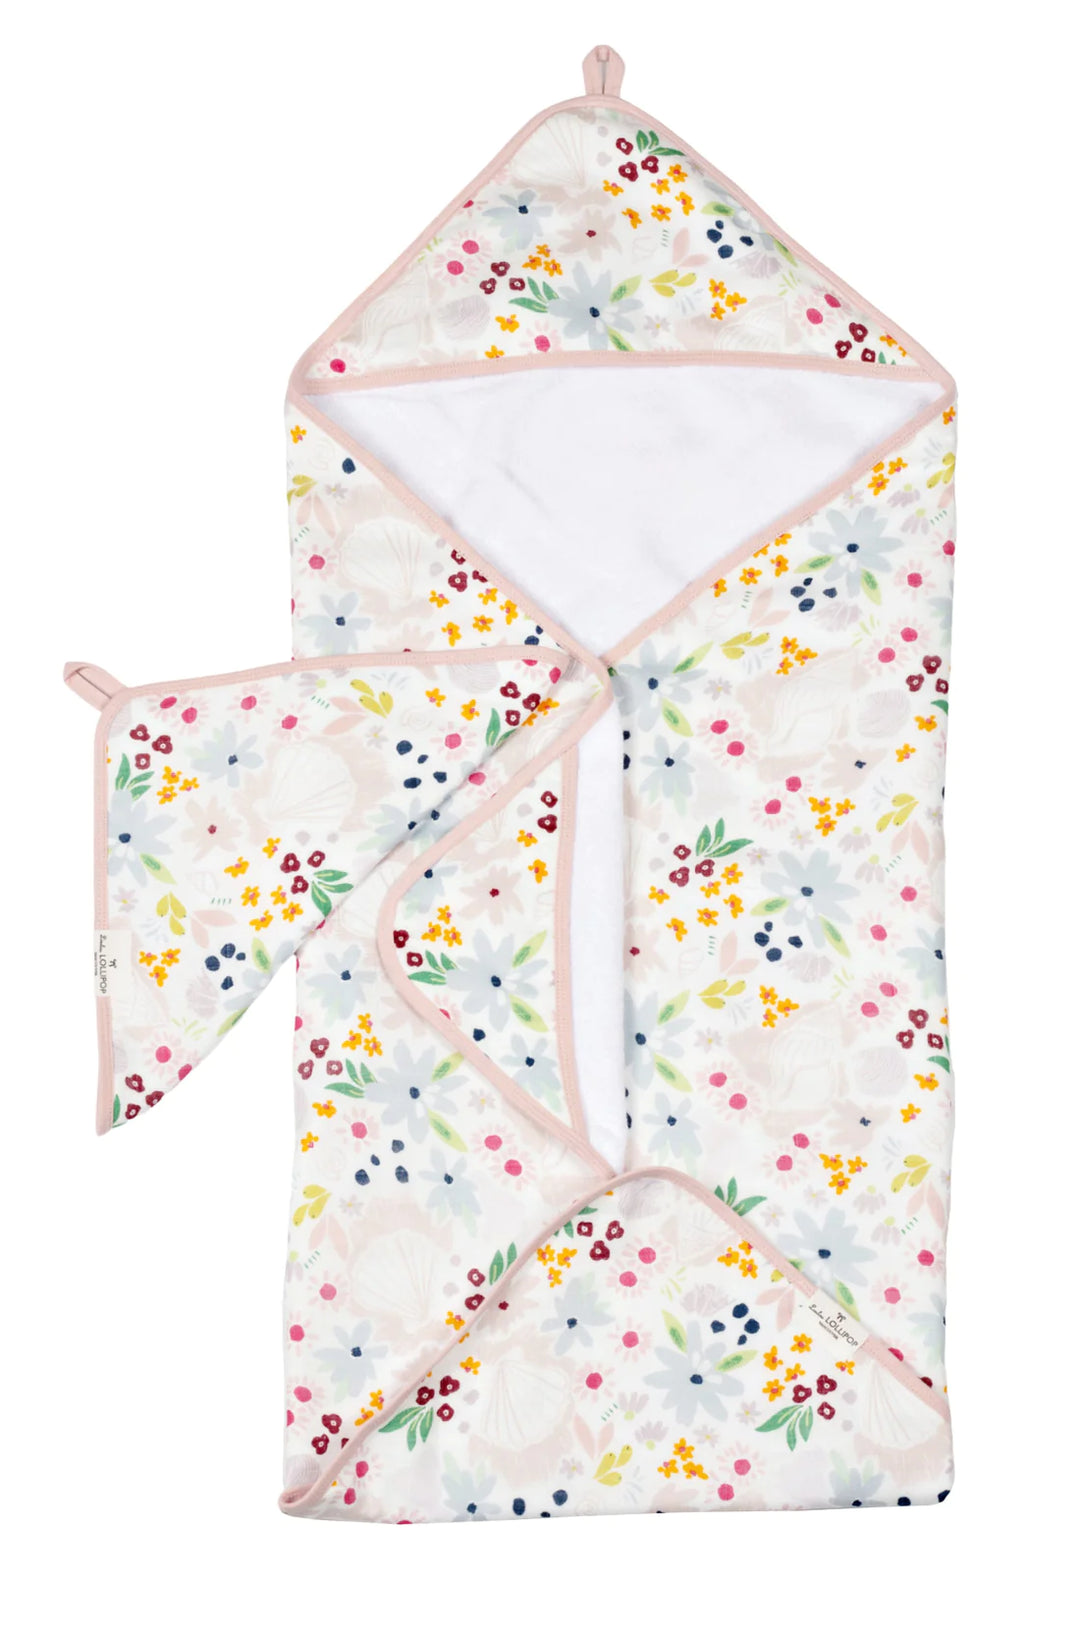 Shell Hooded Towel Set by Loulou Lollipop